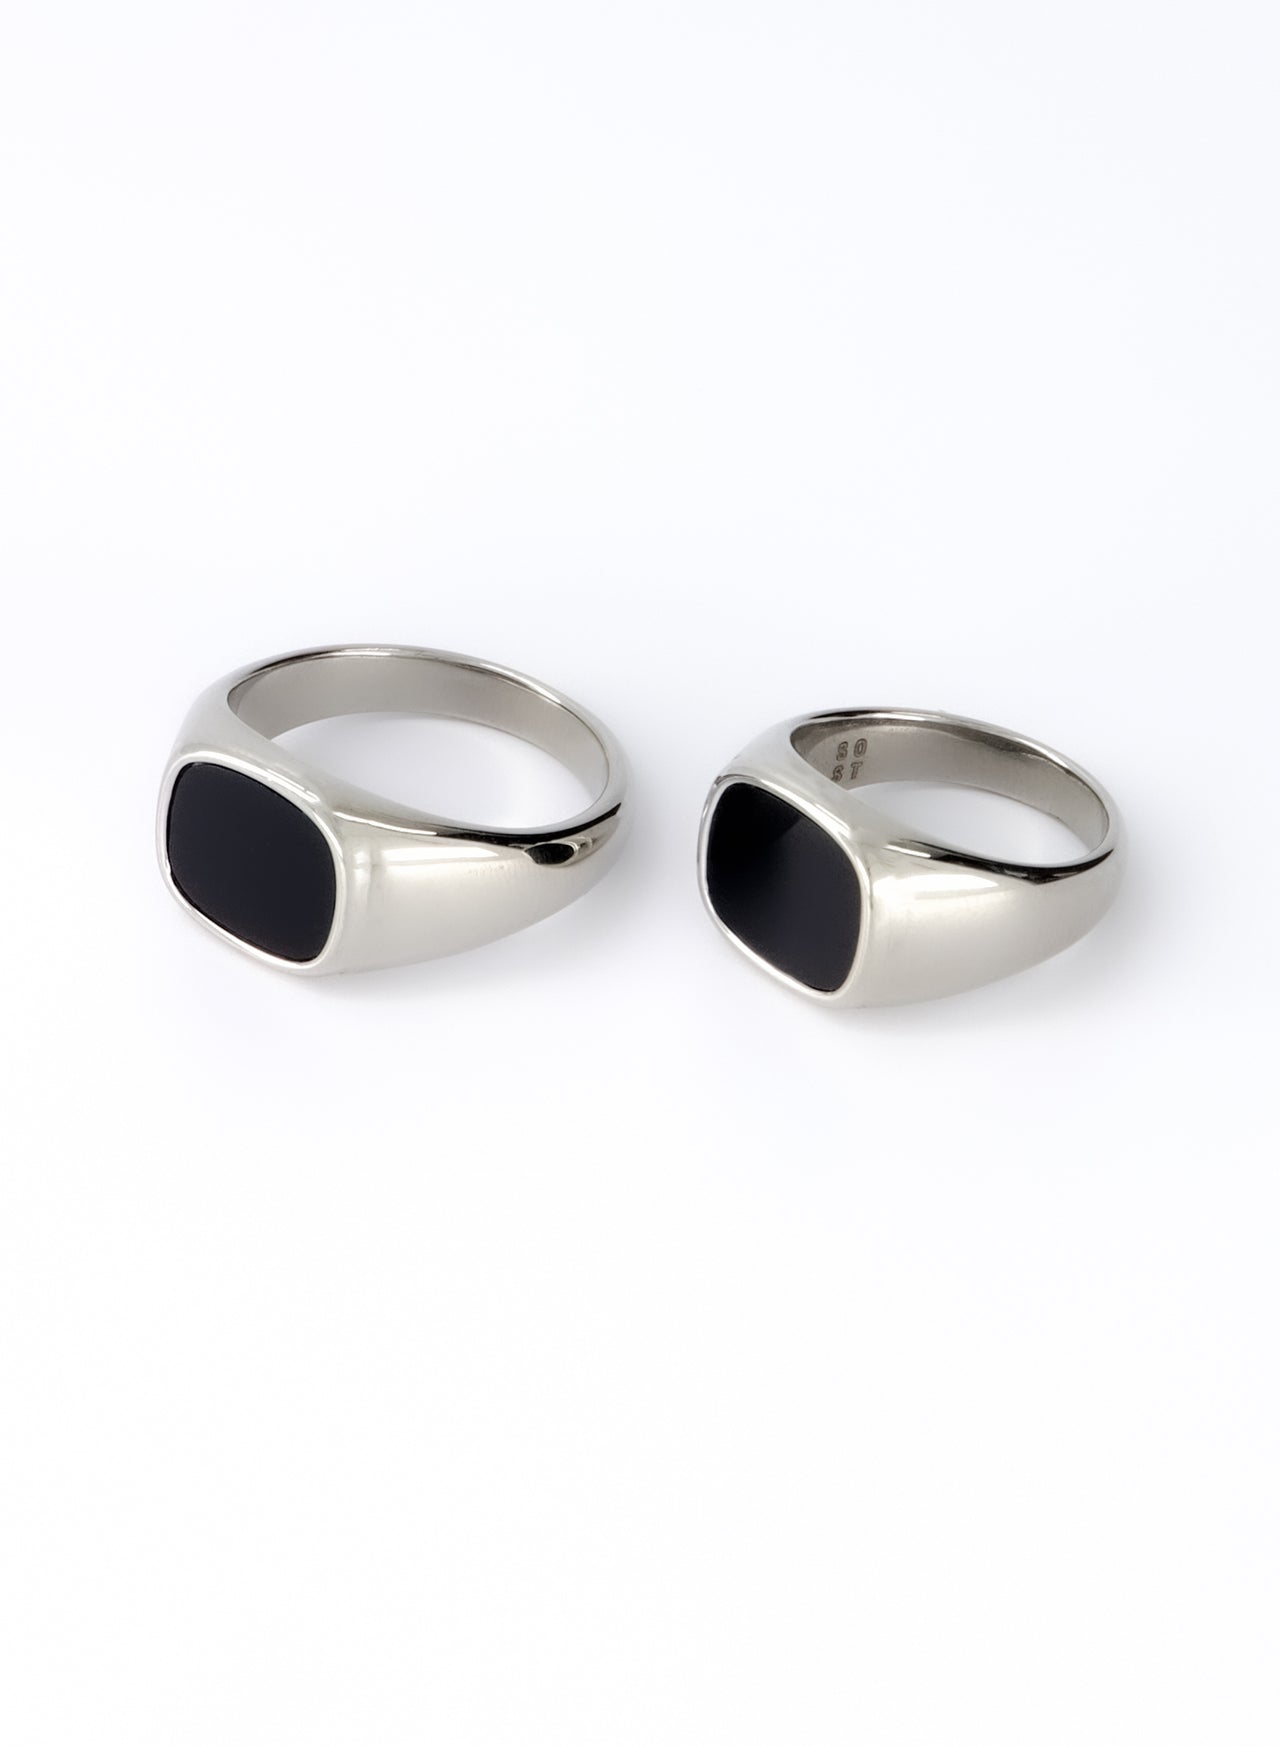 Black Square Signet Ring • Stainless Steel